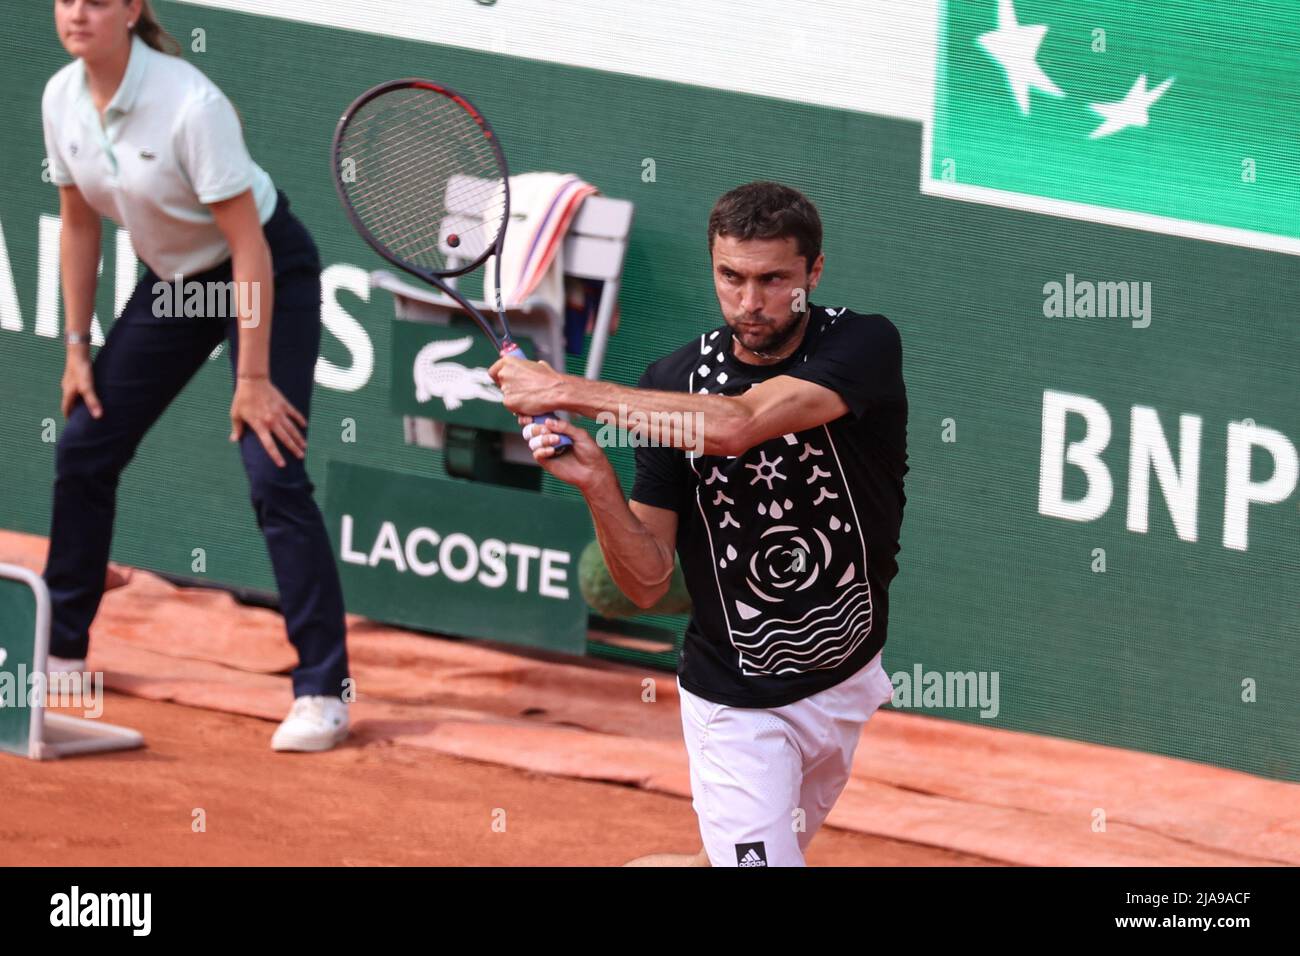 Paris, France. 28th May, 2022. Gilles Simon playing during French Open  Tennis Roland Garros 2022 on